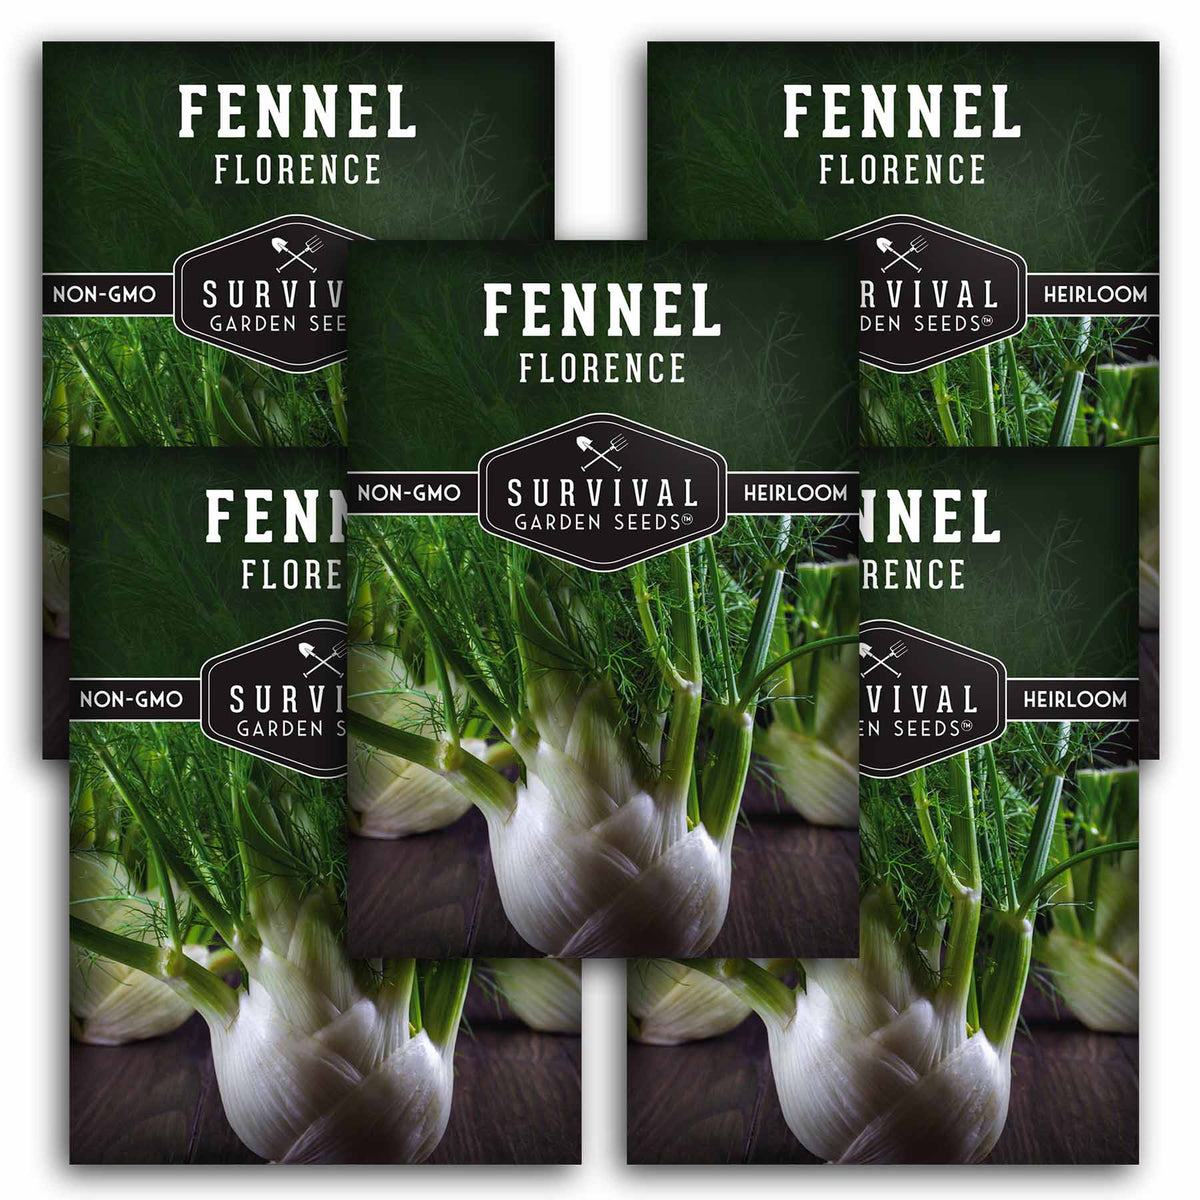 5 packets of Florence Fennel seeds